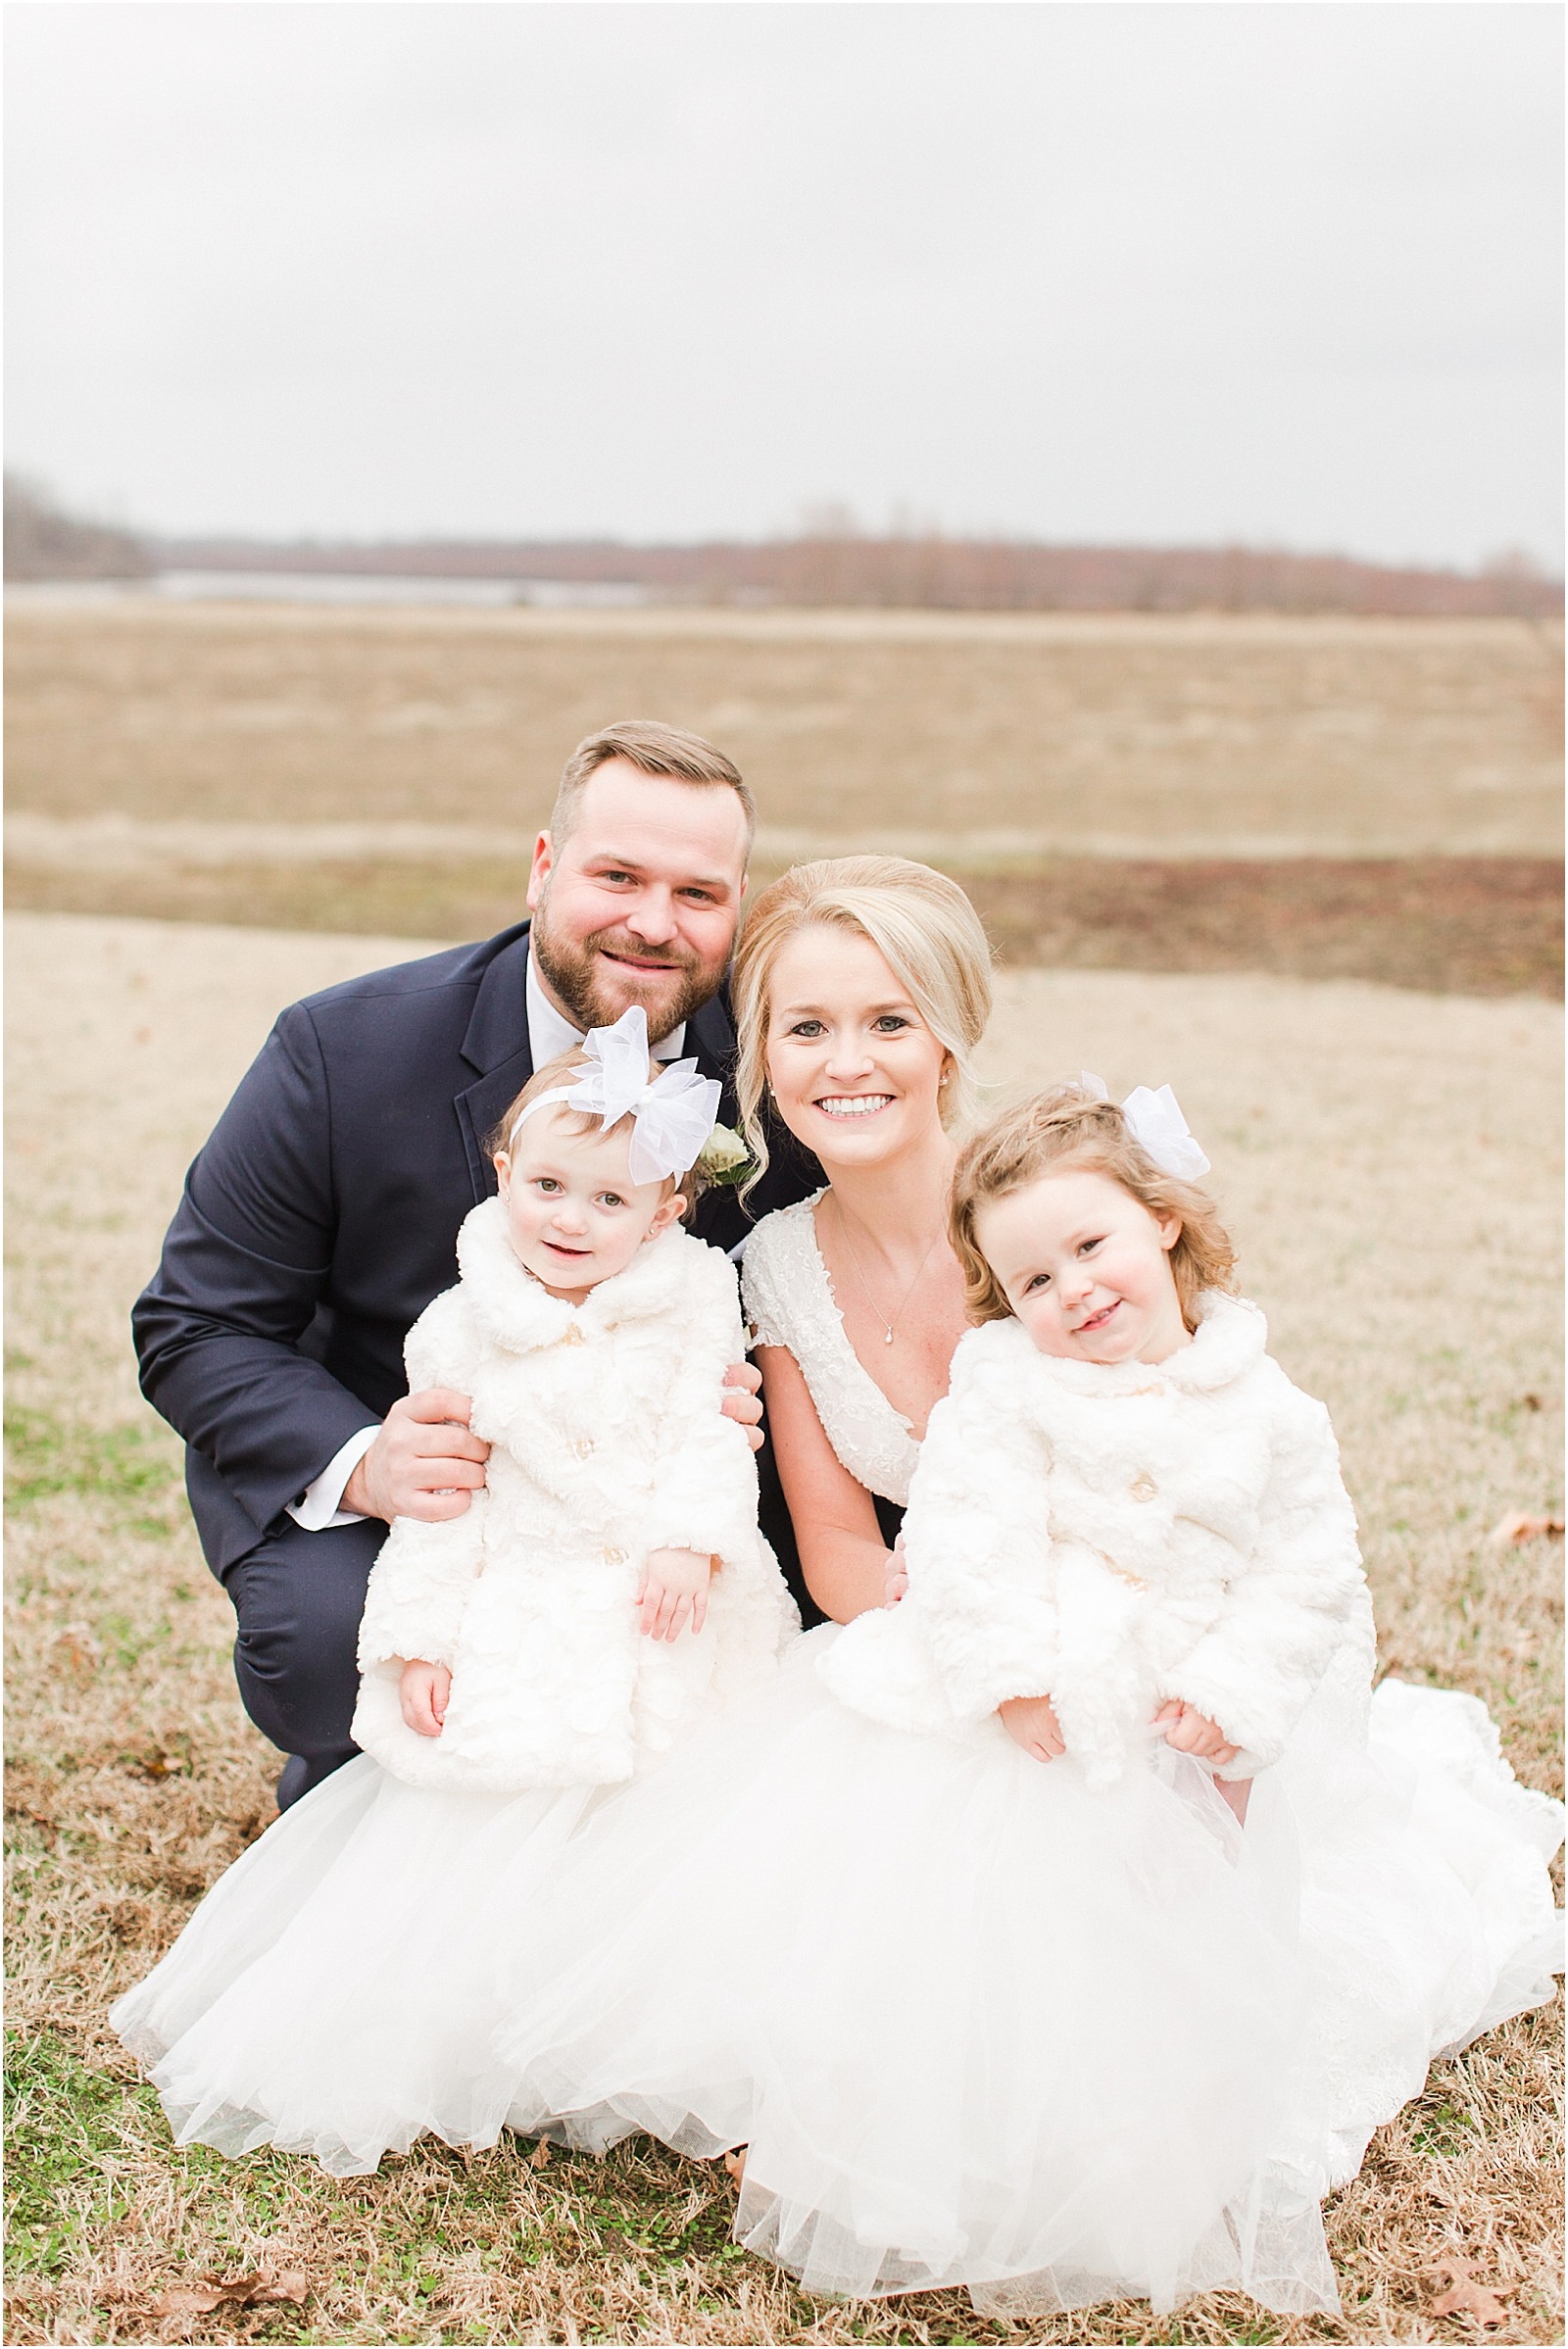 A Classic Winter Wedding in New Harmony | Rachel and Ryan | Bret and Brandie Photography 0066.jpg